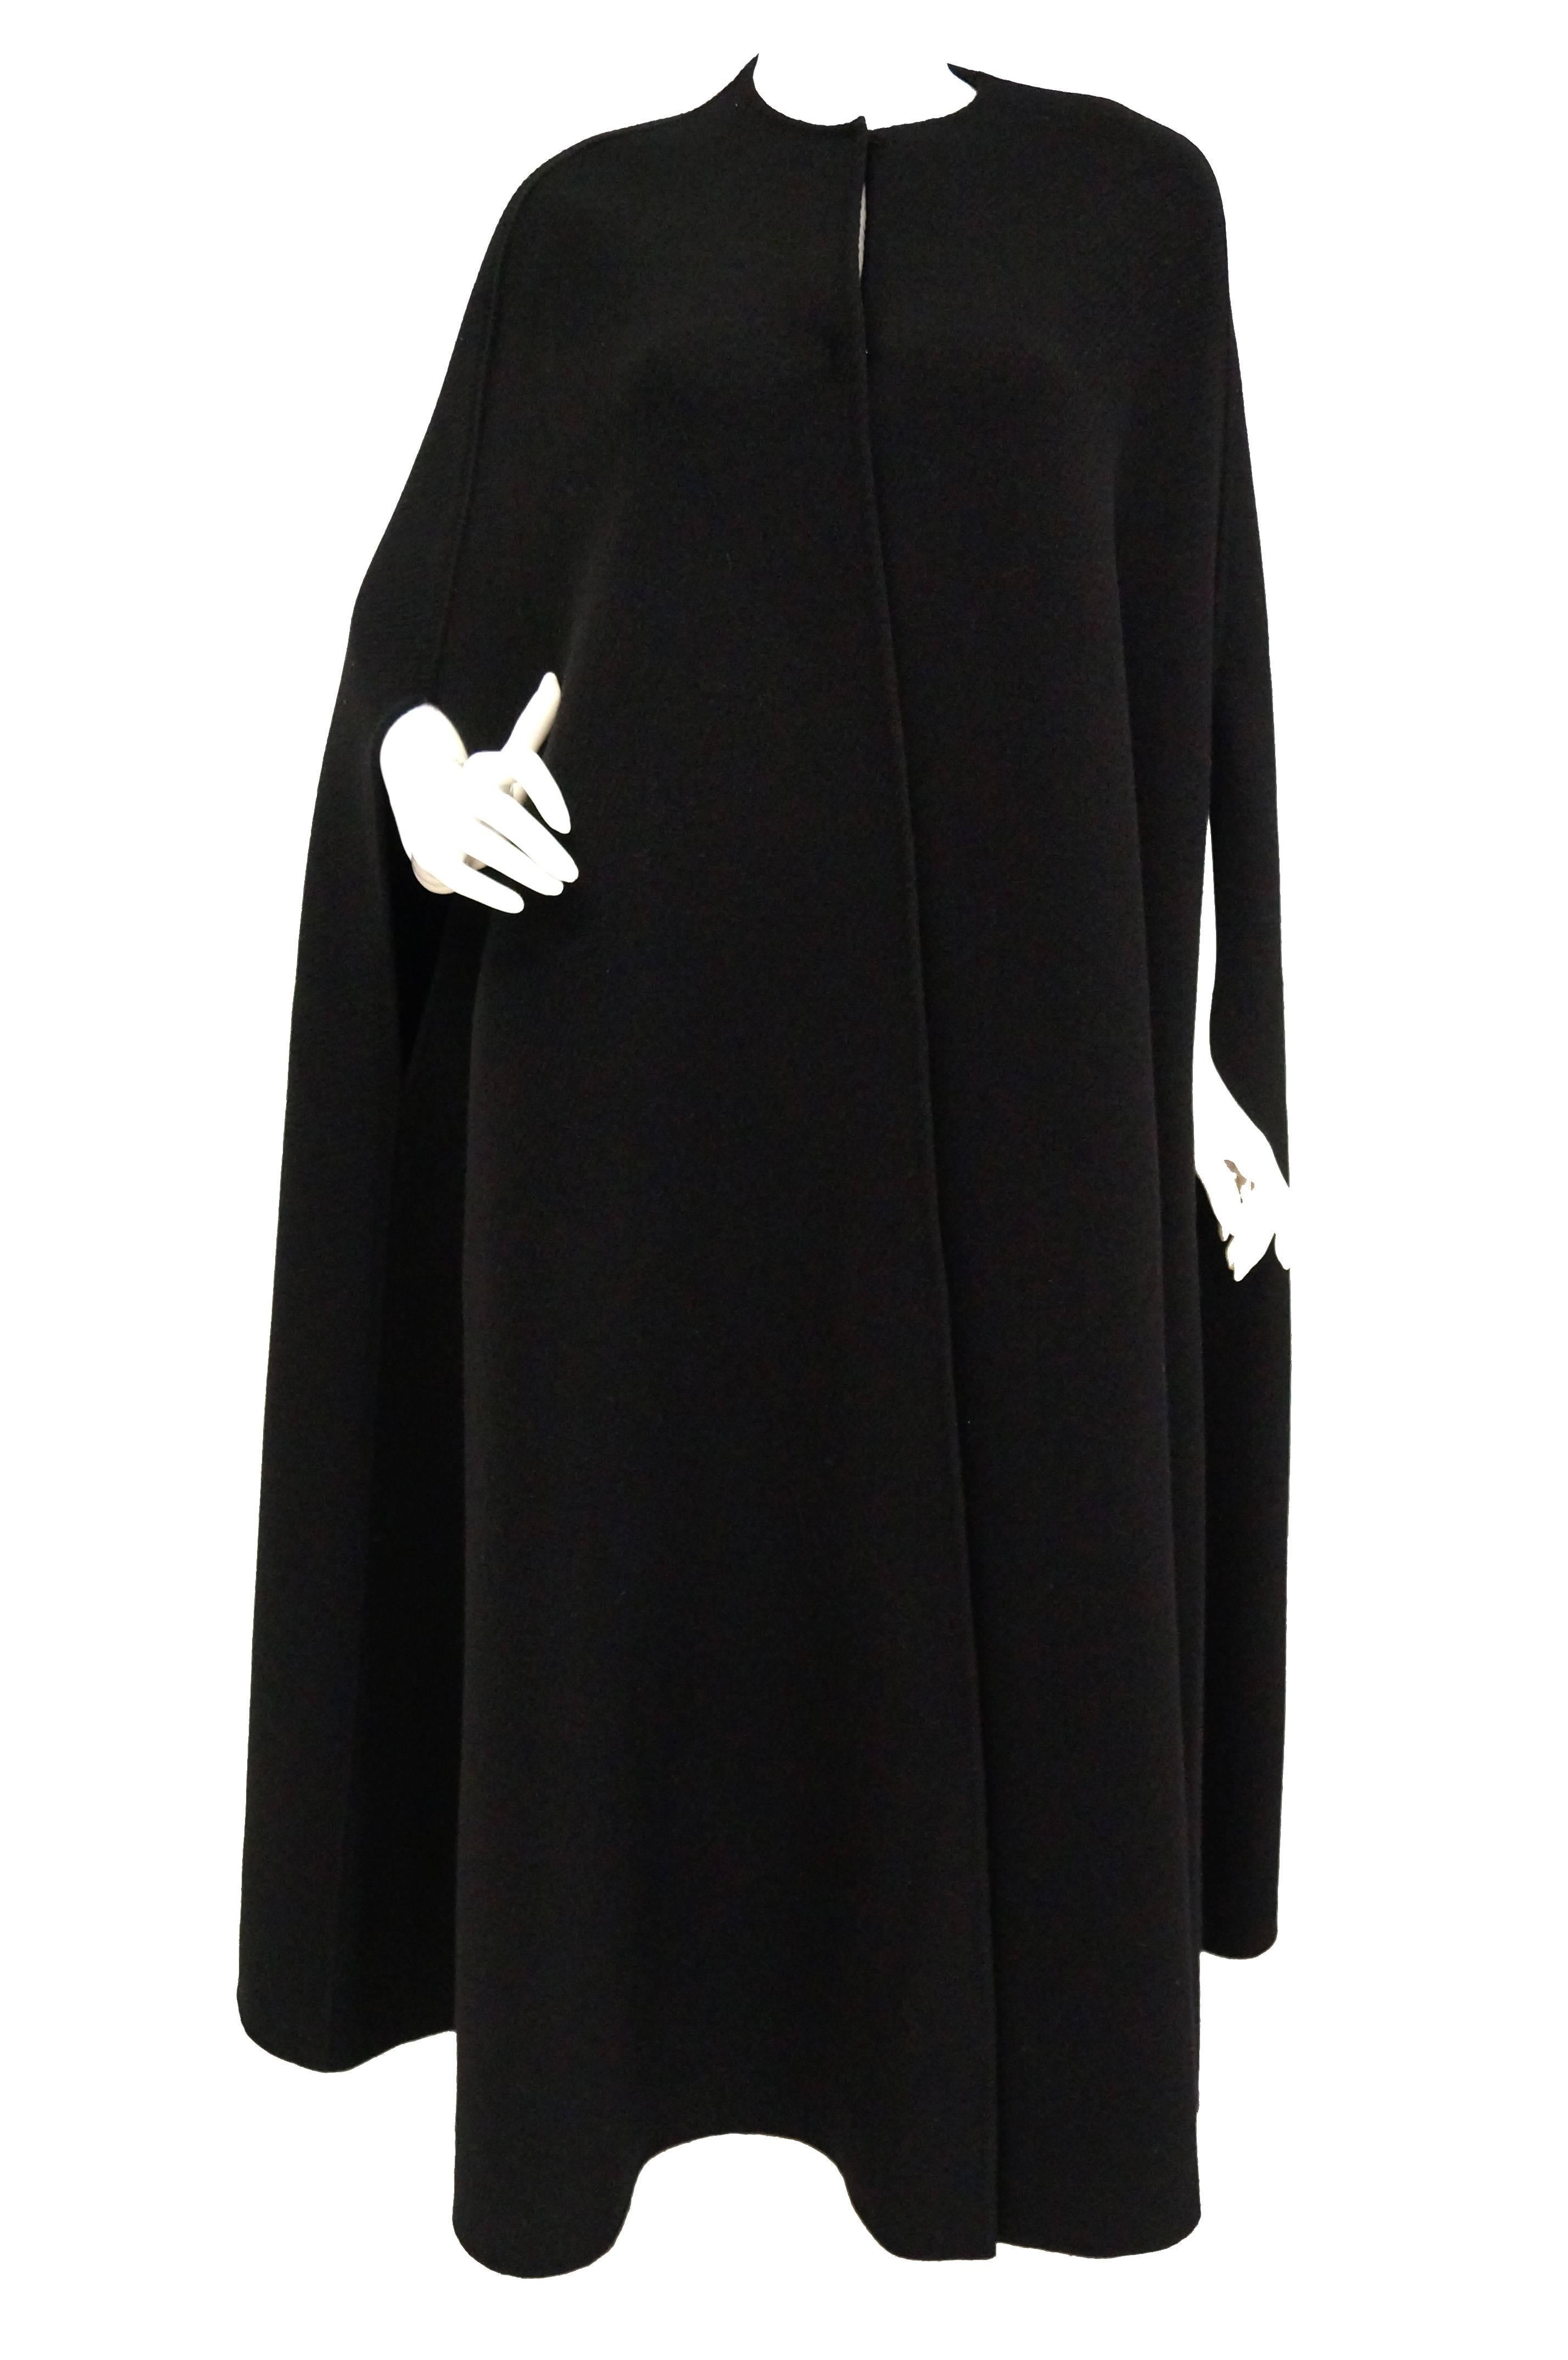 Madame Gres, was a genius and could could create gorgeous designs under even the most strict limitations. The gorgeous cloak is made of black wool, and features a rounded neckline as well as slits for arms. The wool is heavy, with strong, precise